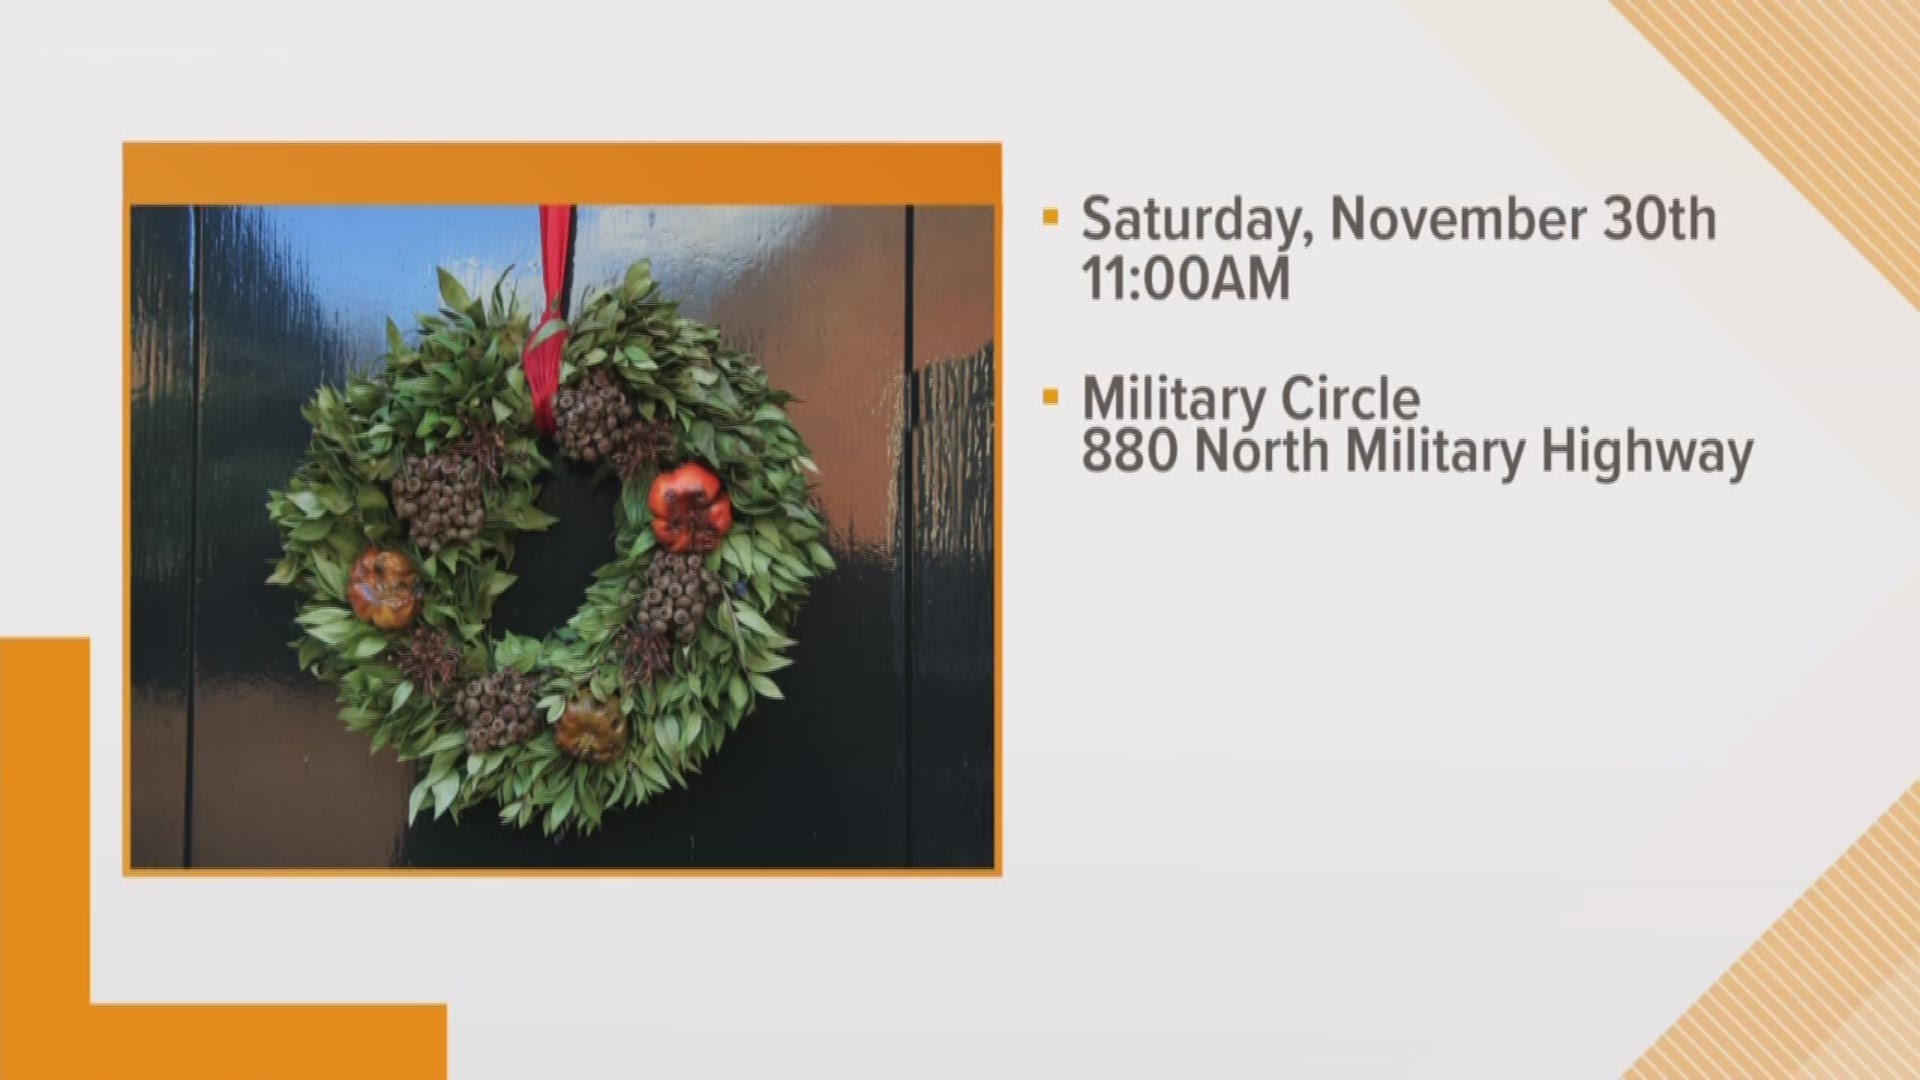 To usher in the holiday season, Military Circle is hosting Santa’s Welcome Parade on Saturday, November 30!